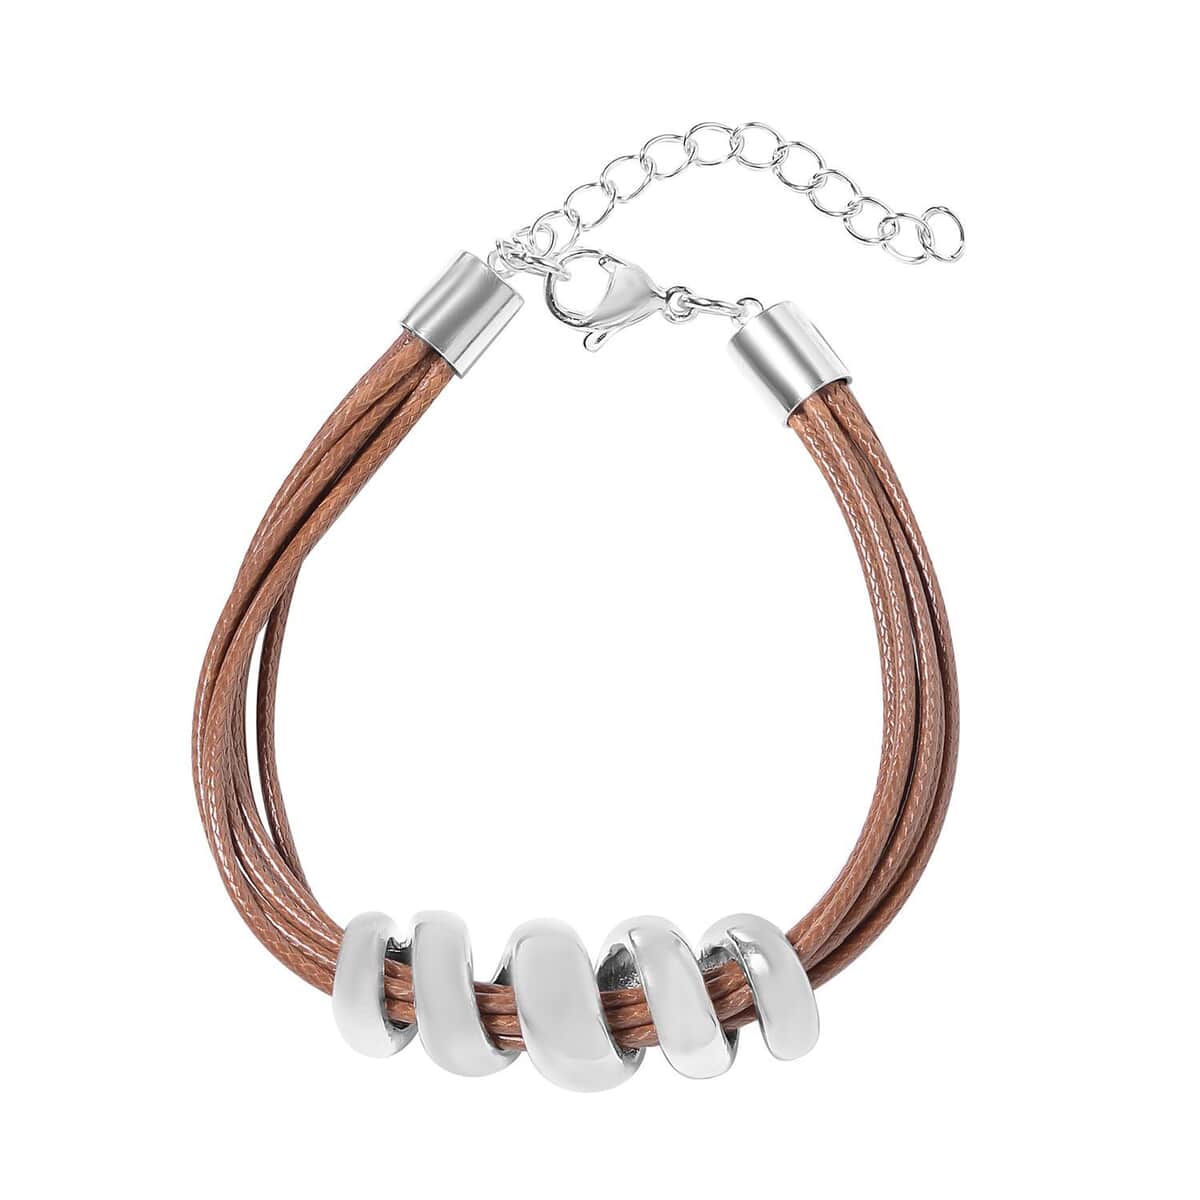 Brown Faux Leather Cord Twist Bracelet (7-8.50In) and Necklace 16-18In in Stainless Steel image number 2